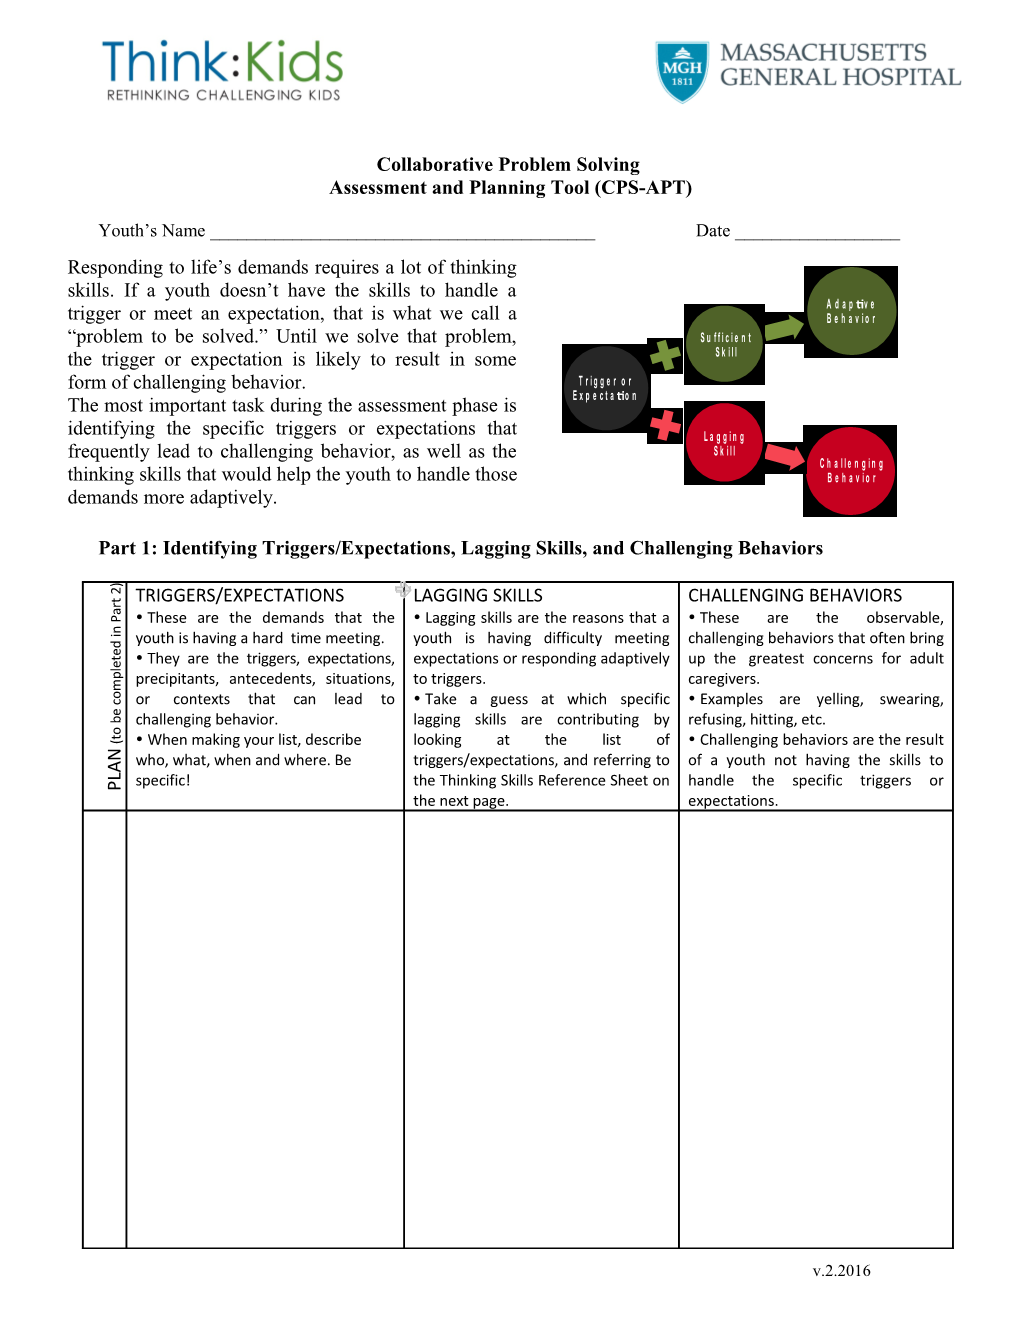 Assessment and Planning Tool (CPS-APT)